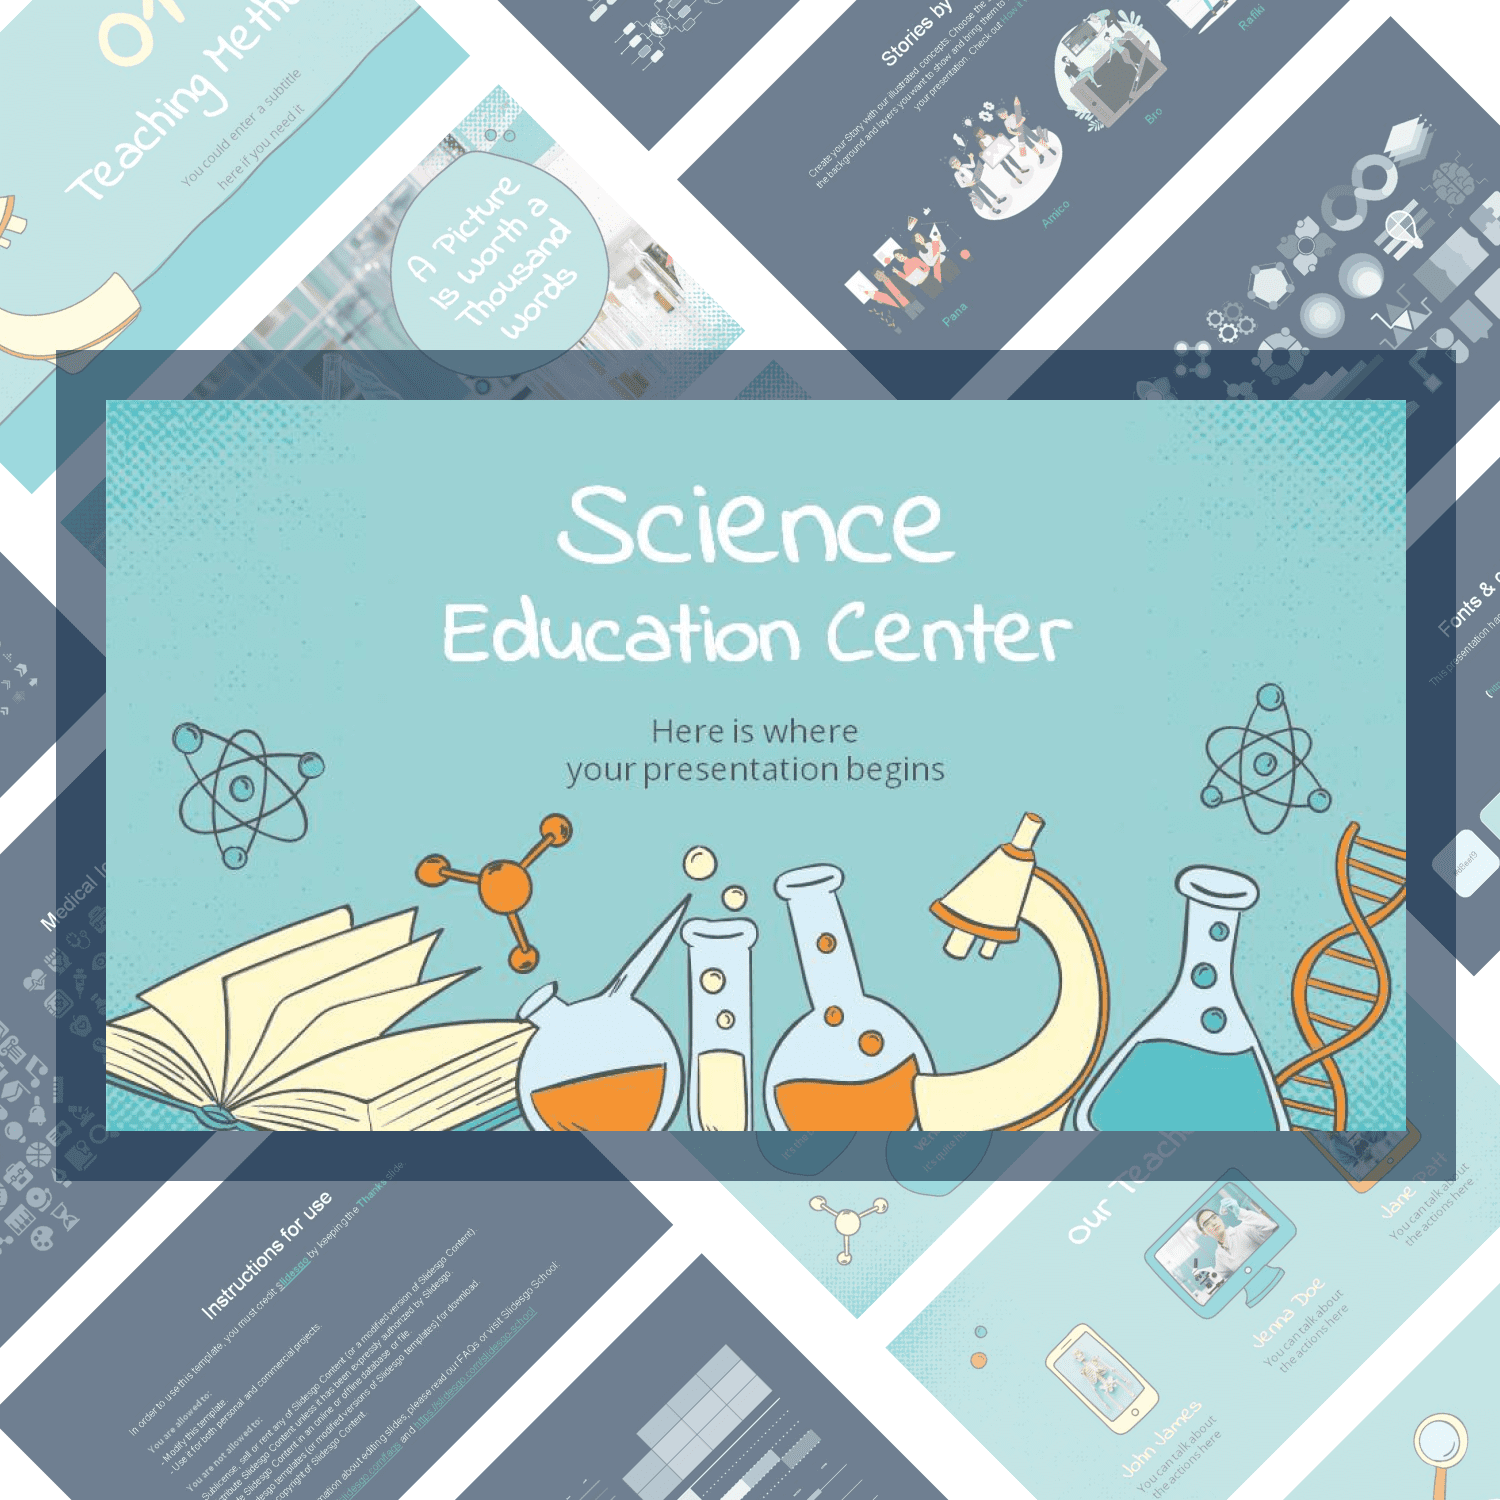 Free Science Education Center PowerPoint Template.